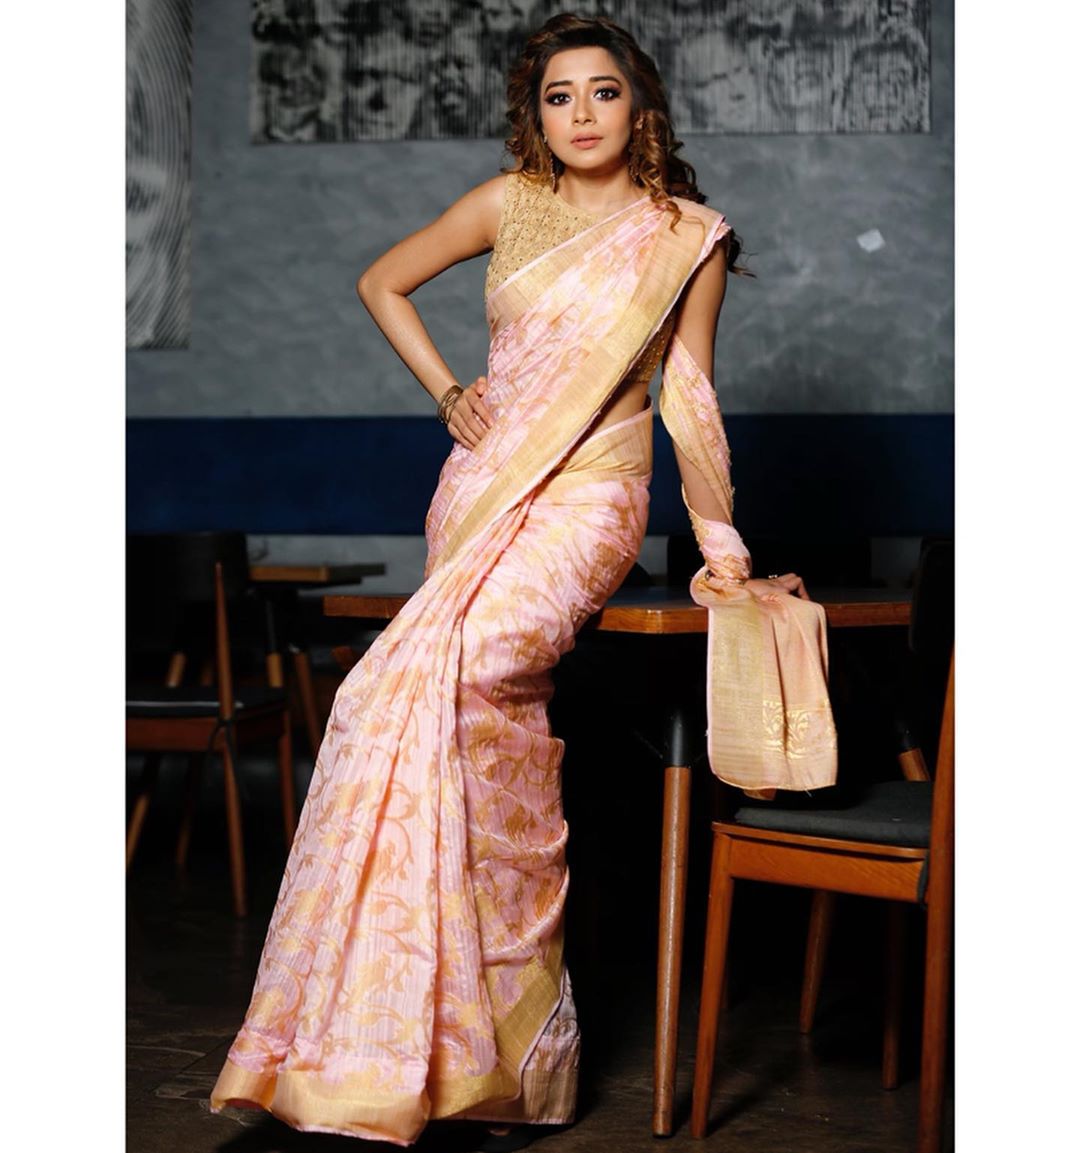 Tina Datta Looks Gorgeous In Her Latest Sari Avatar The Indian Wire